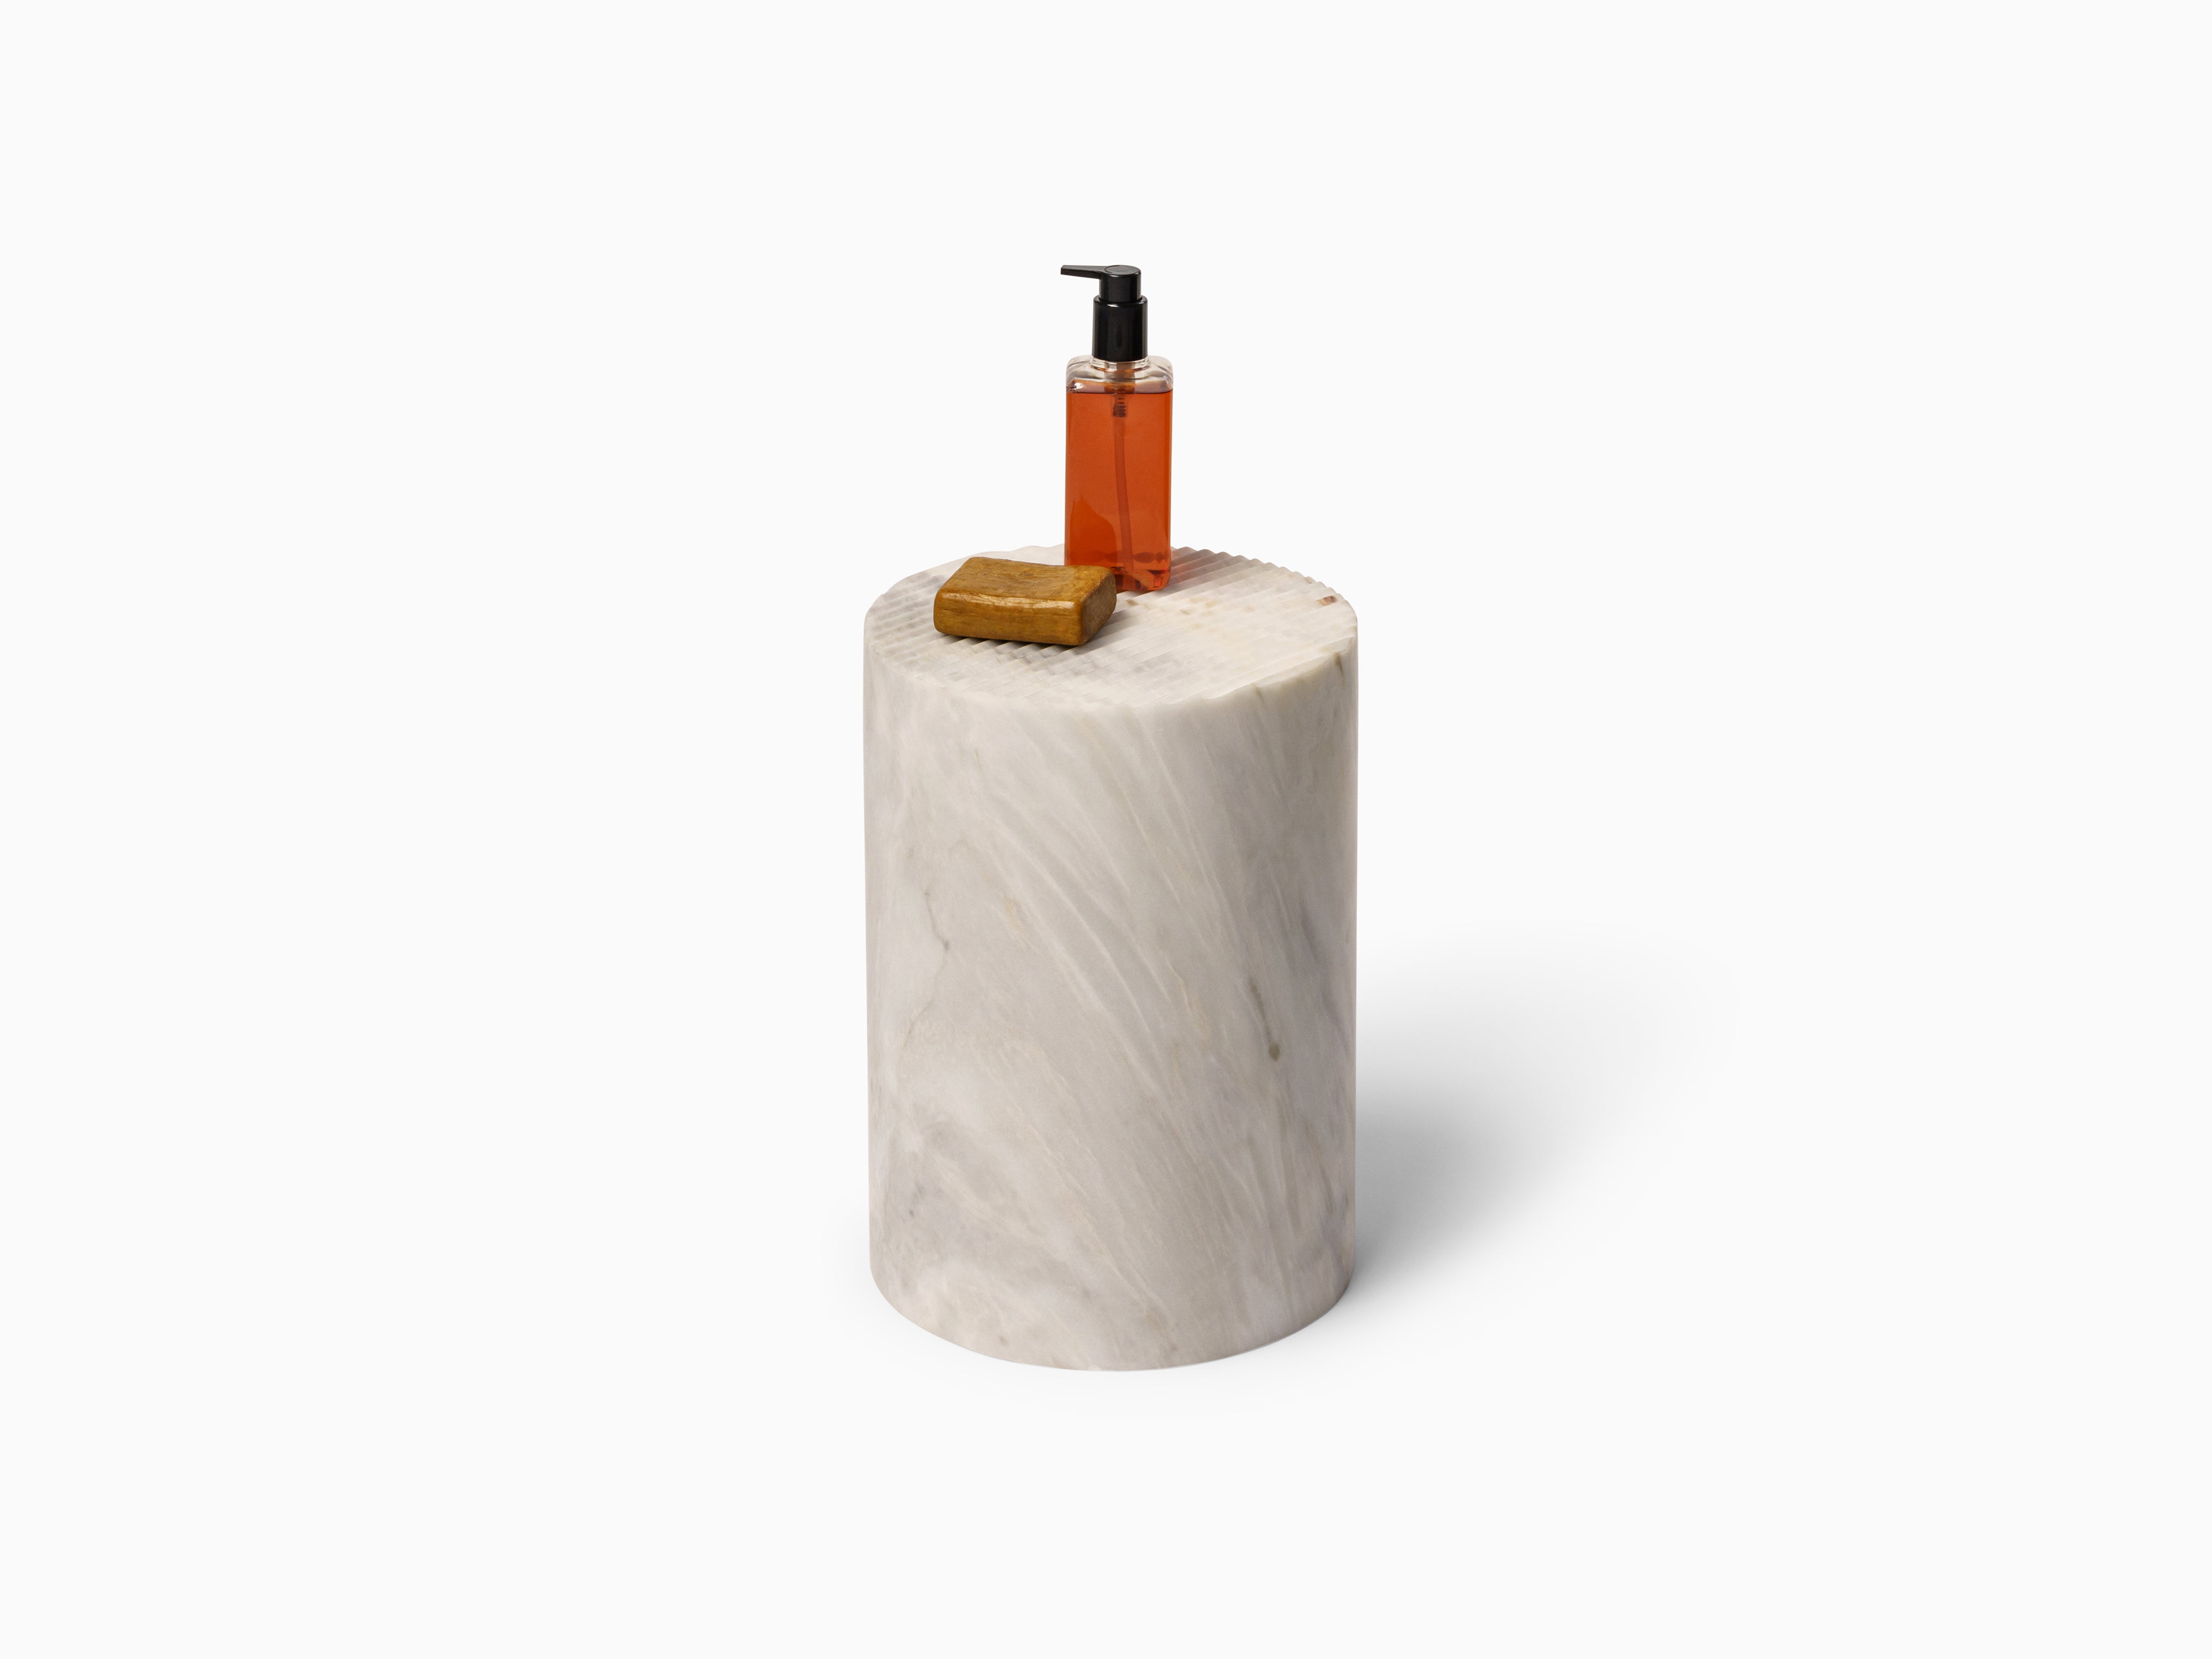 PEDRA side table